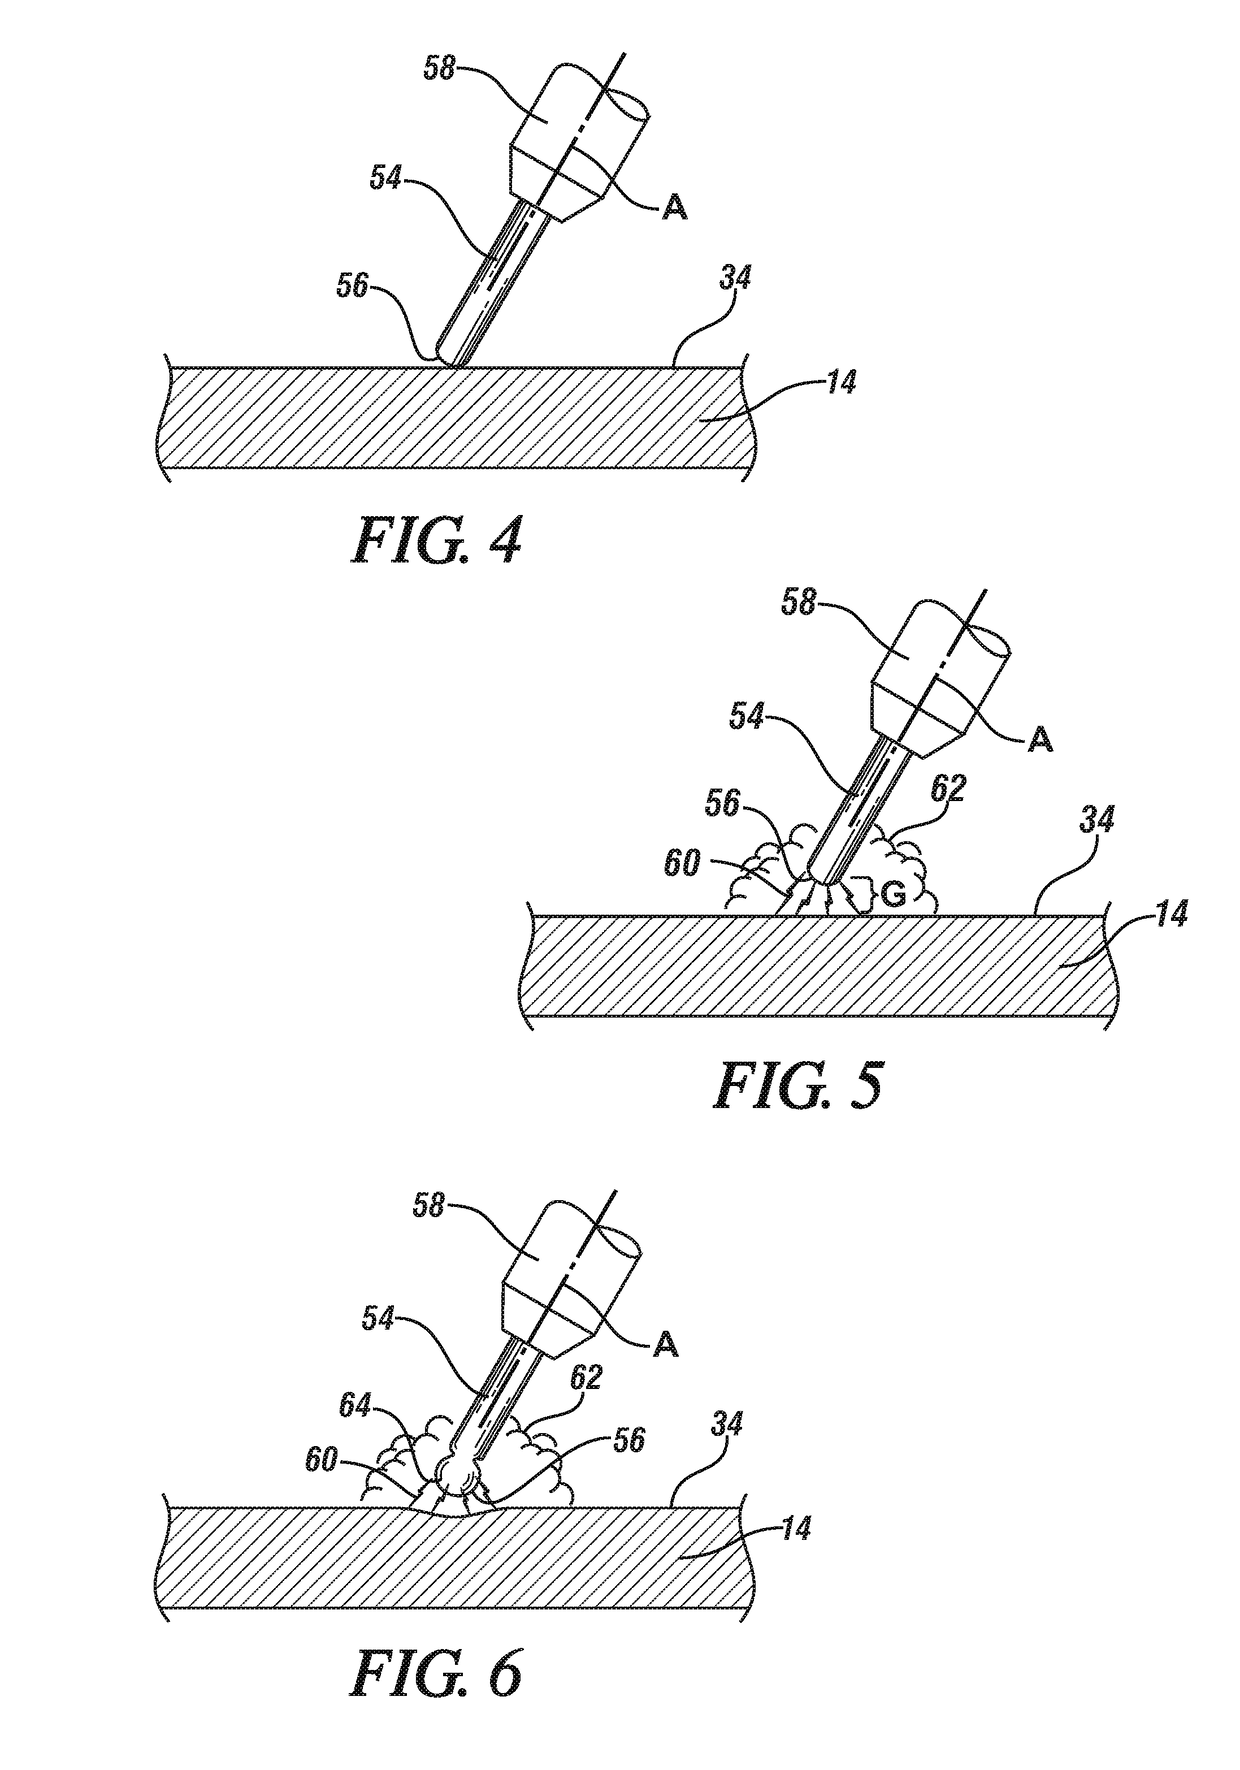 Method of joining aluminum and steel workpieces